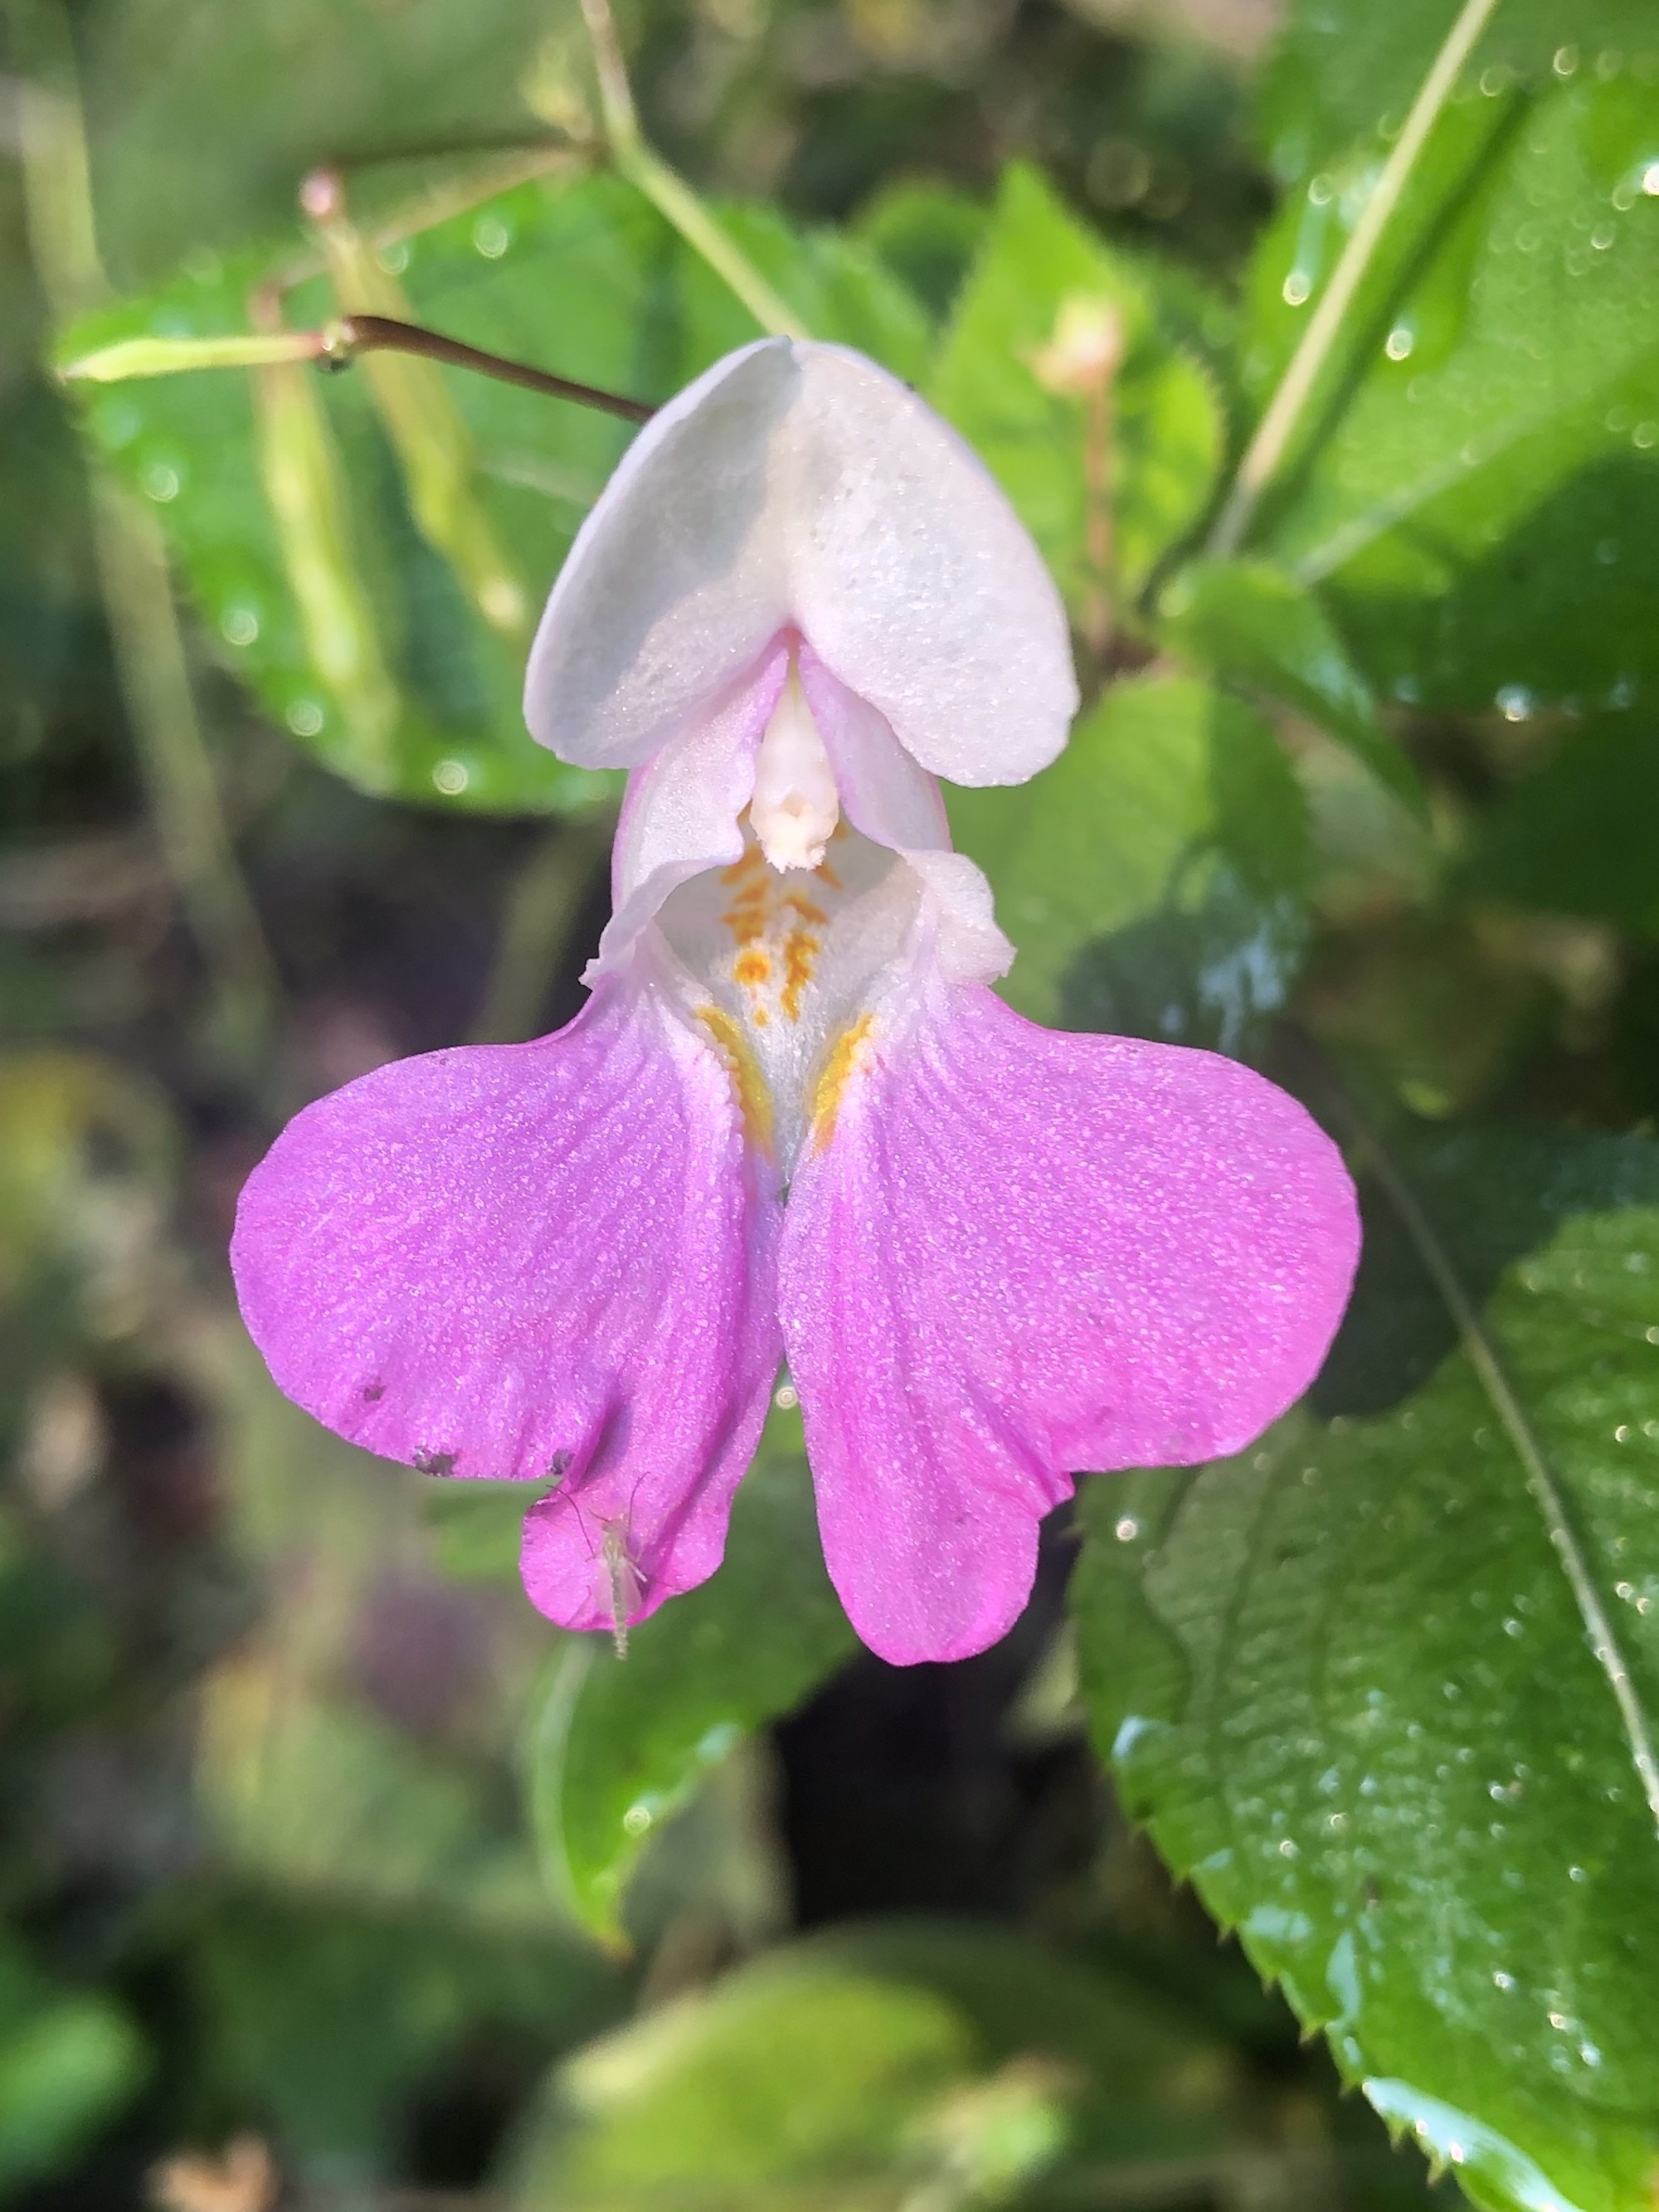 Impatiens Balfourii in woods next to Wingra Park parking lot on September 15, 2020.